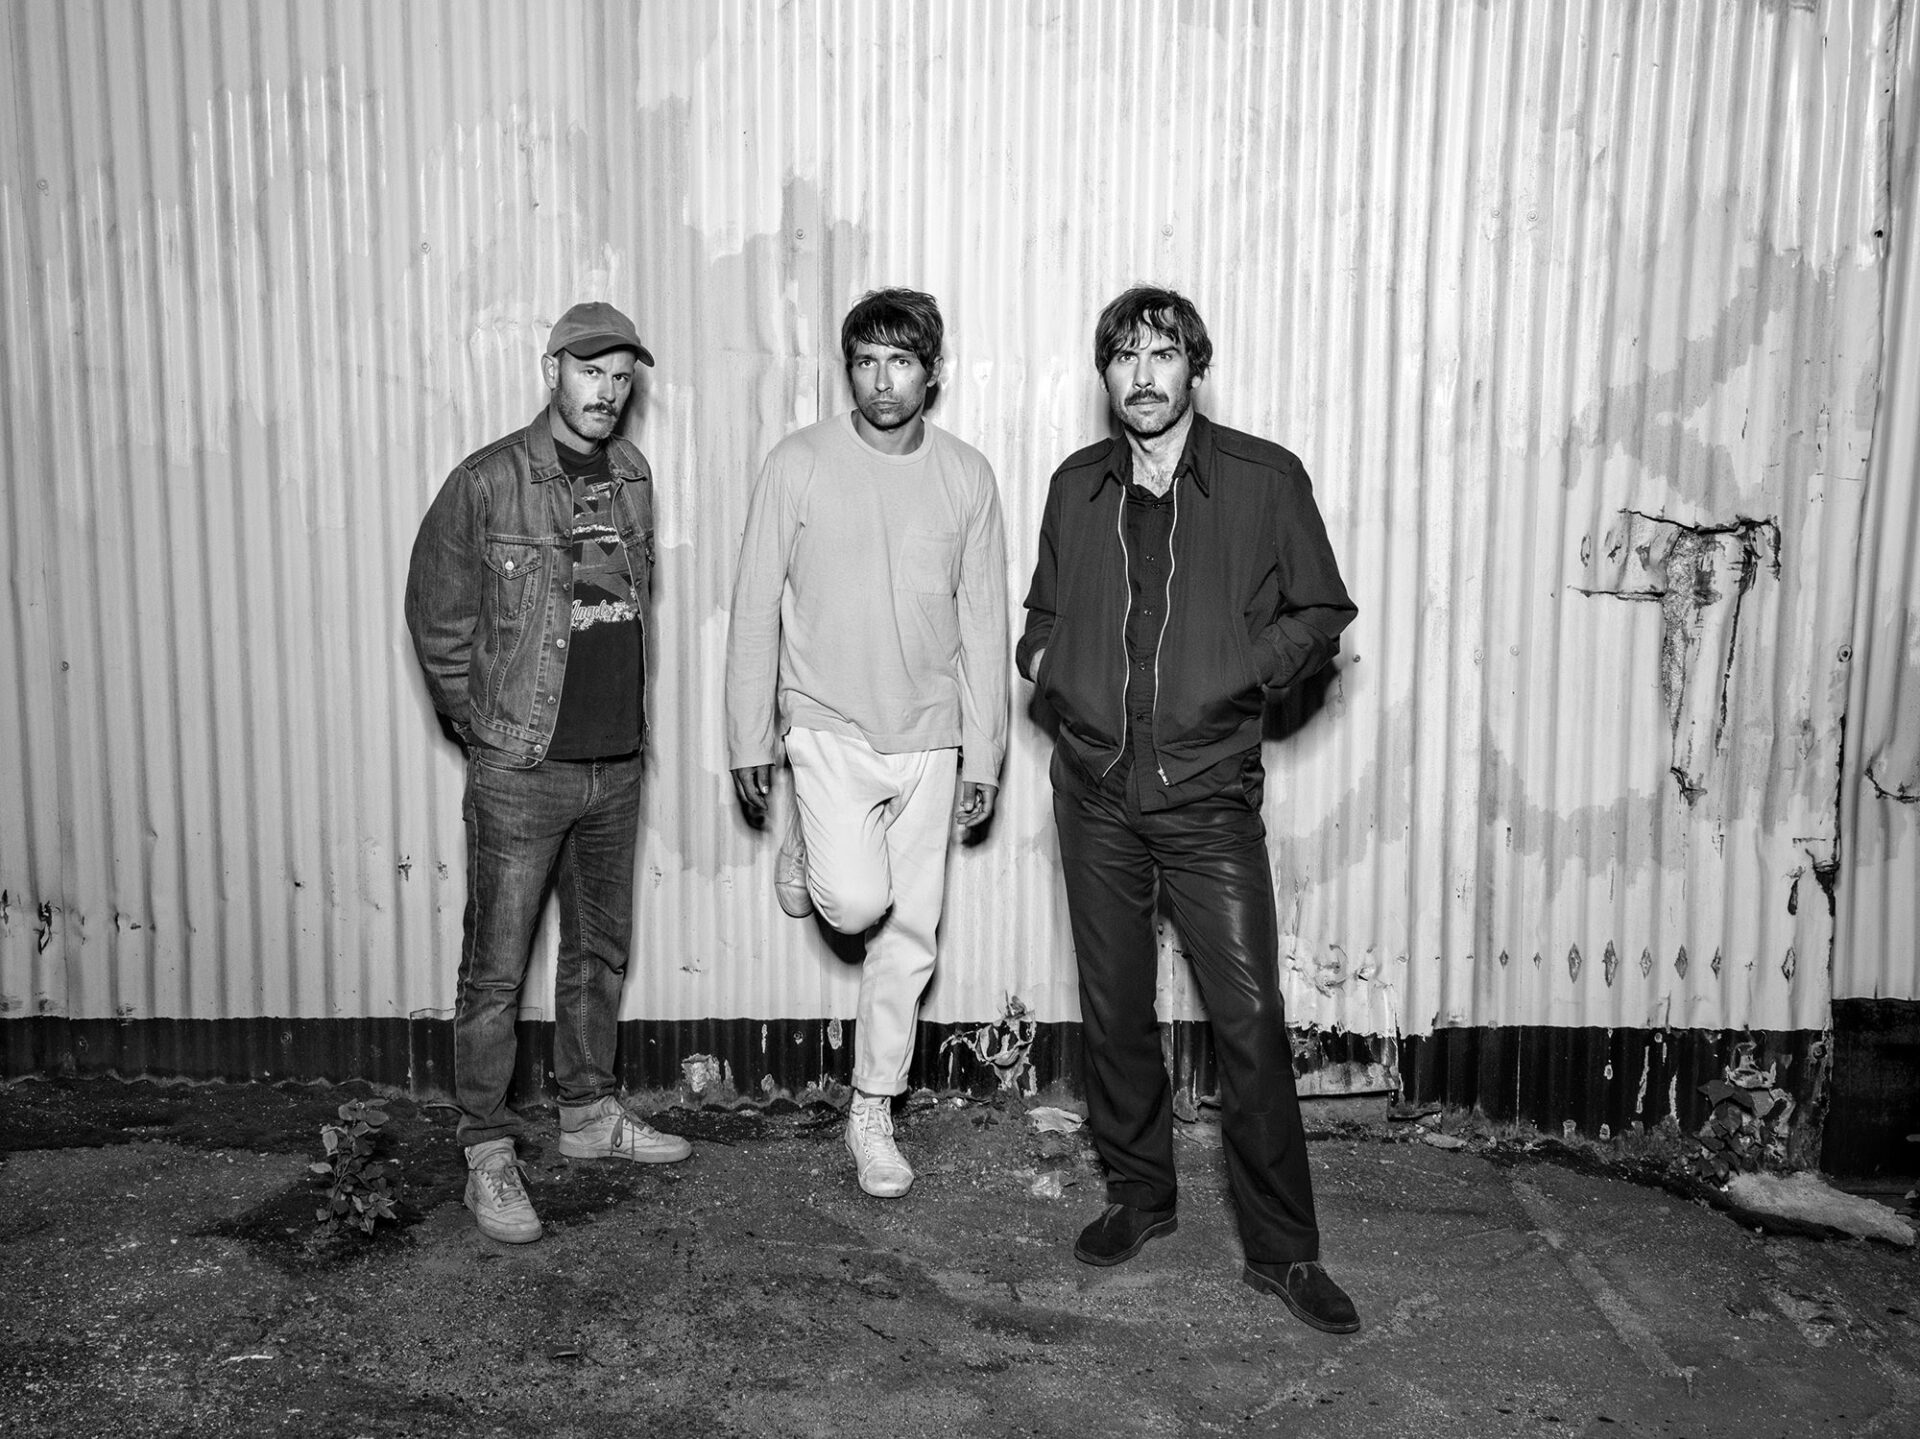 Peter Bjorn and John drop a somber new video for “Darker Days”